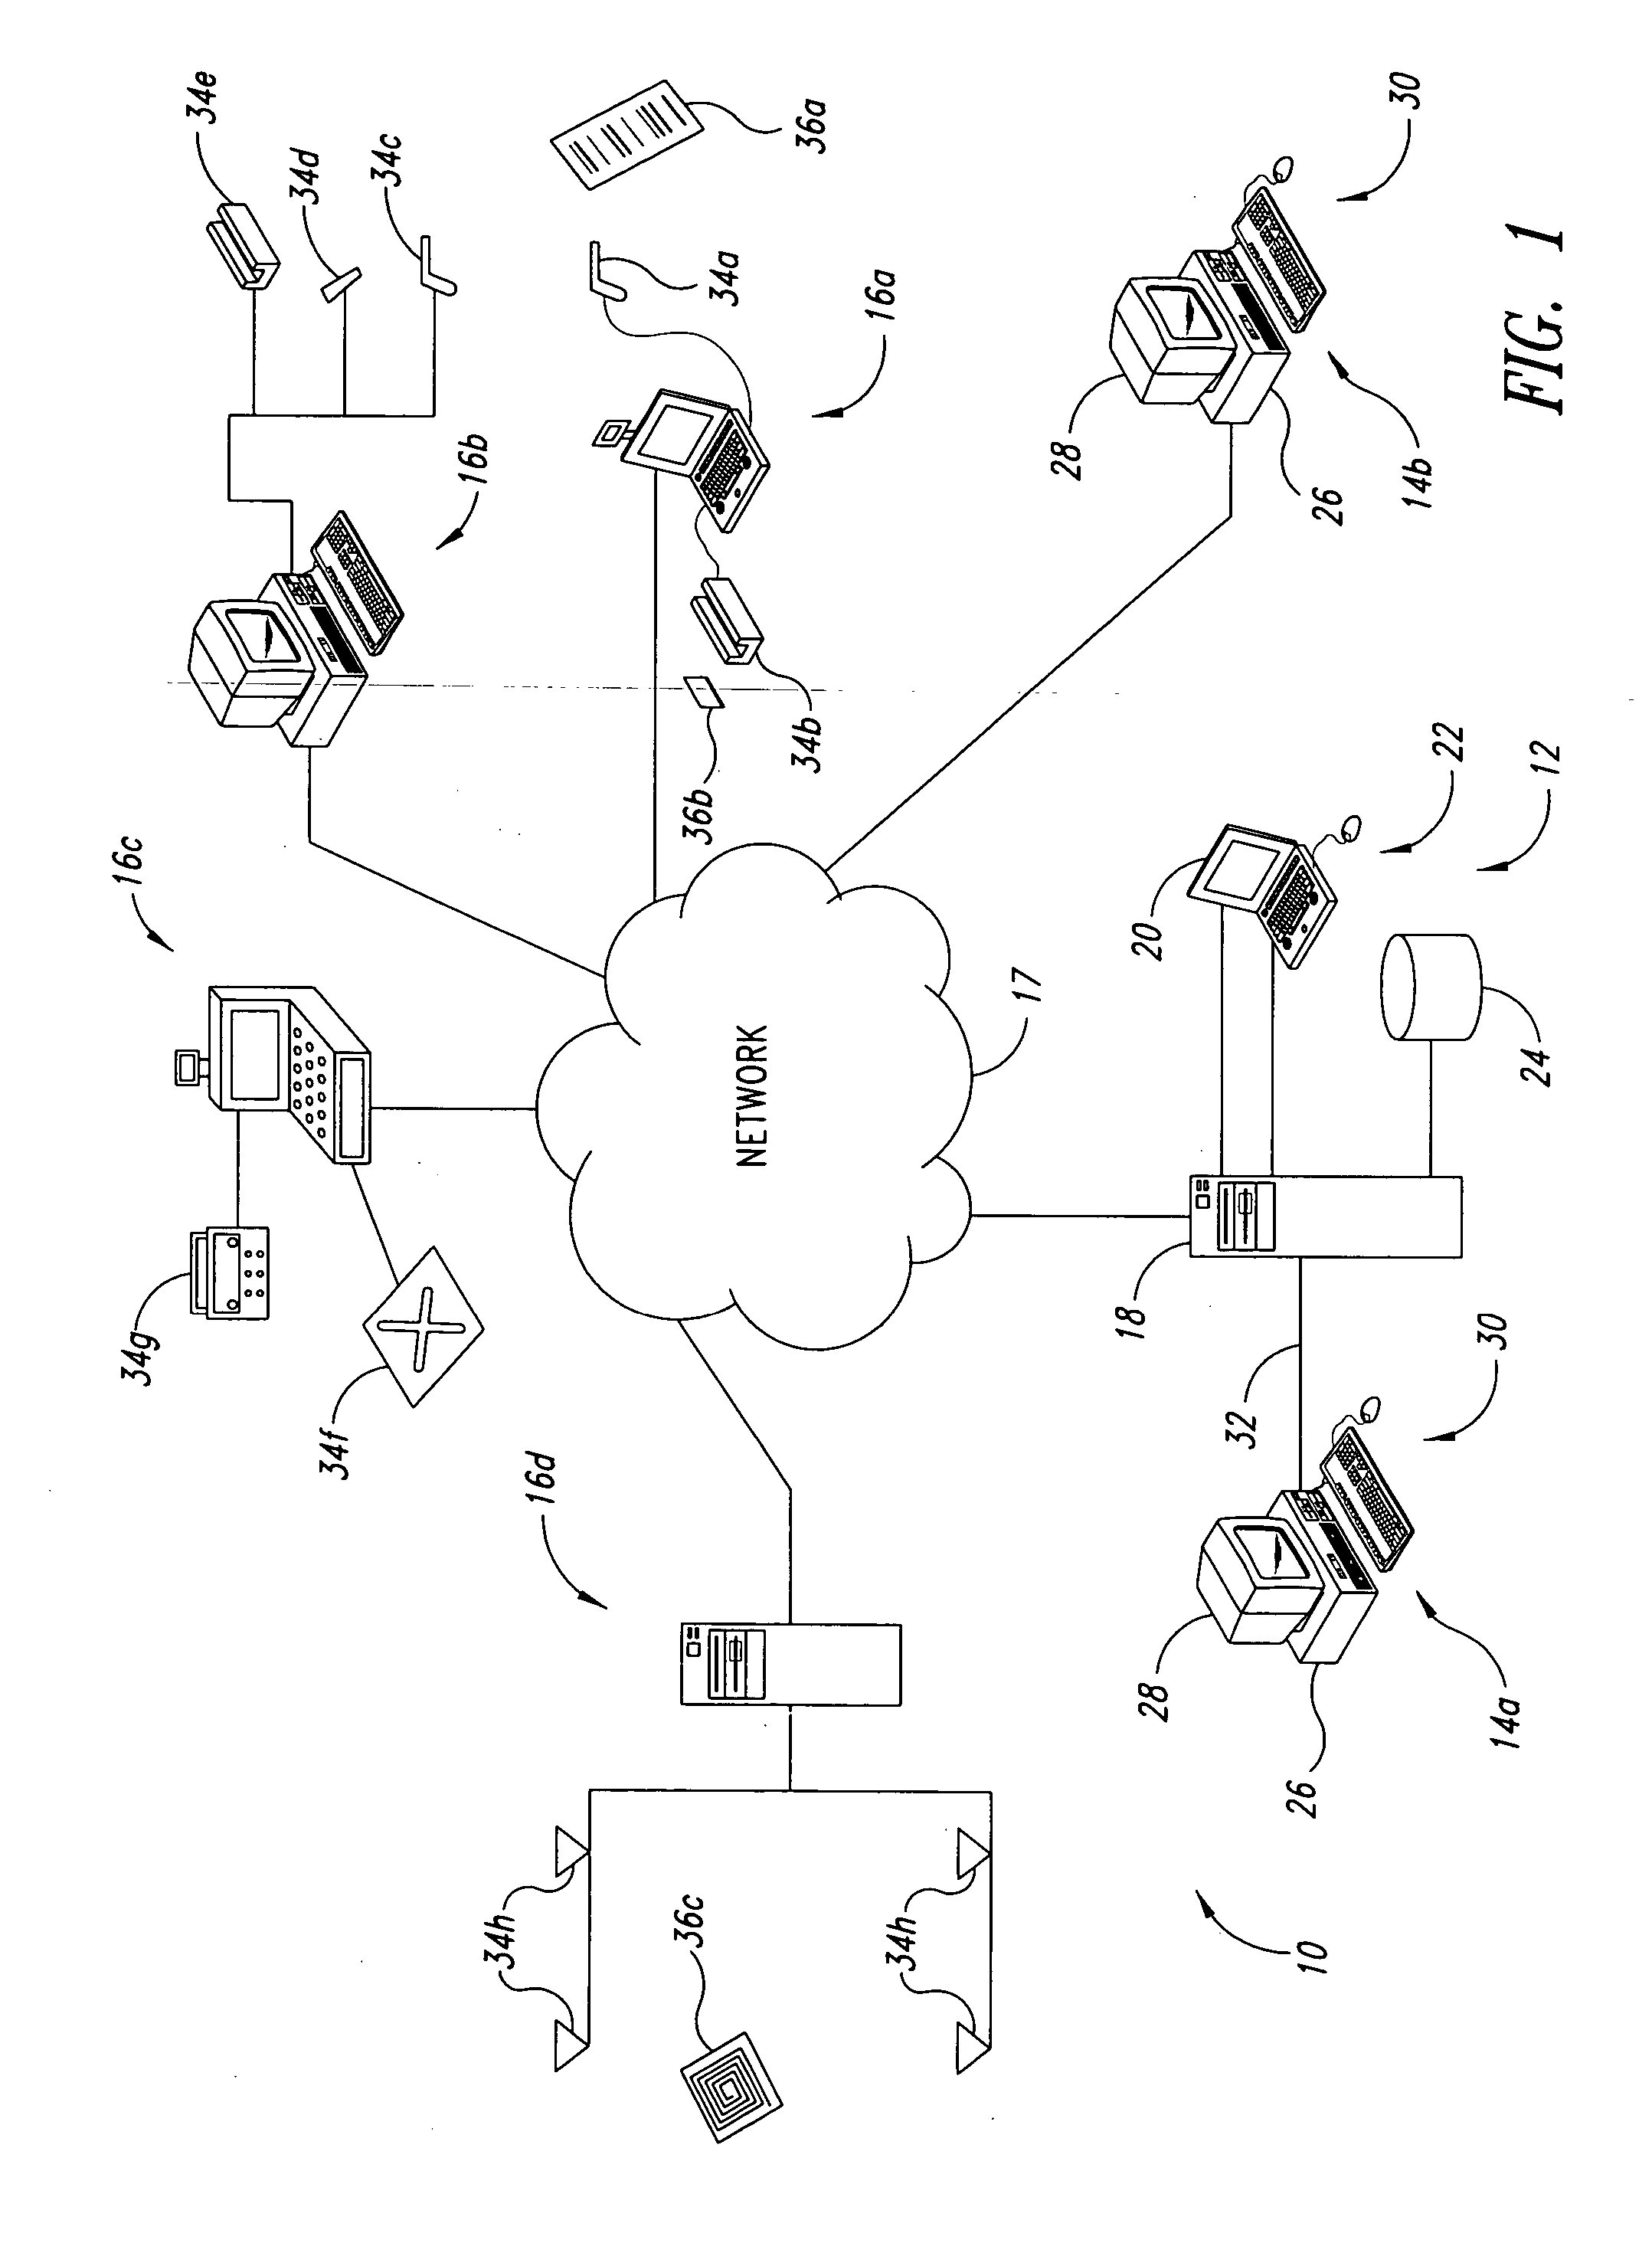 Method, apparatus and article for validating ADC devices, such as barcode, RFID and magnetic stripe readers